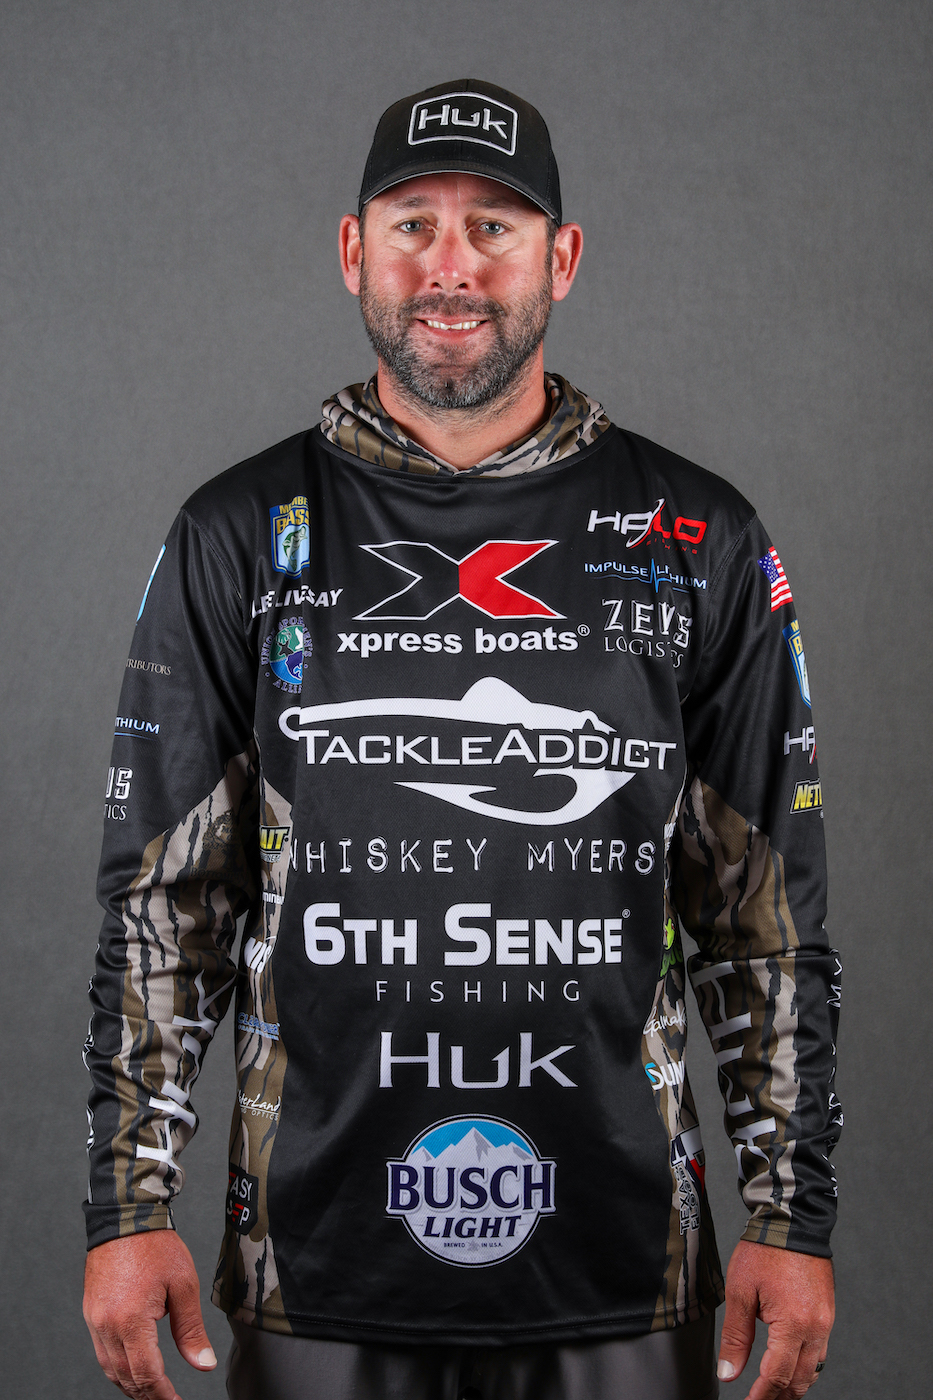 Our Peg-X weight stoppers are going to play a big part for Lee Livesay, Fishing